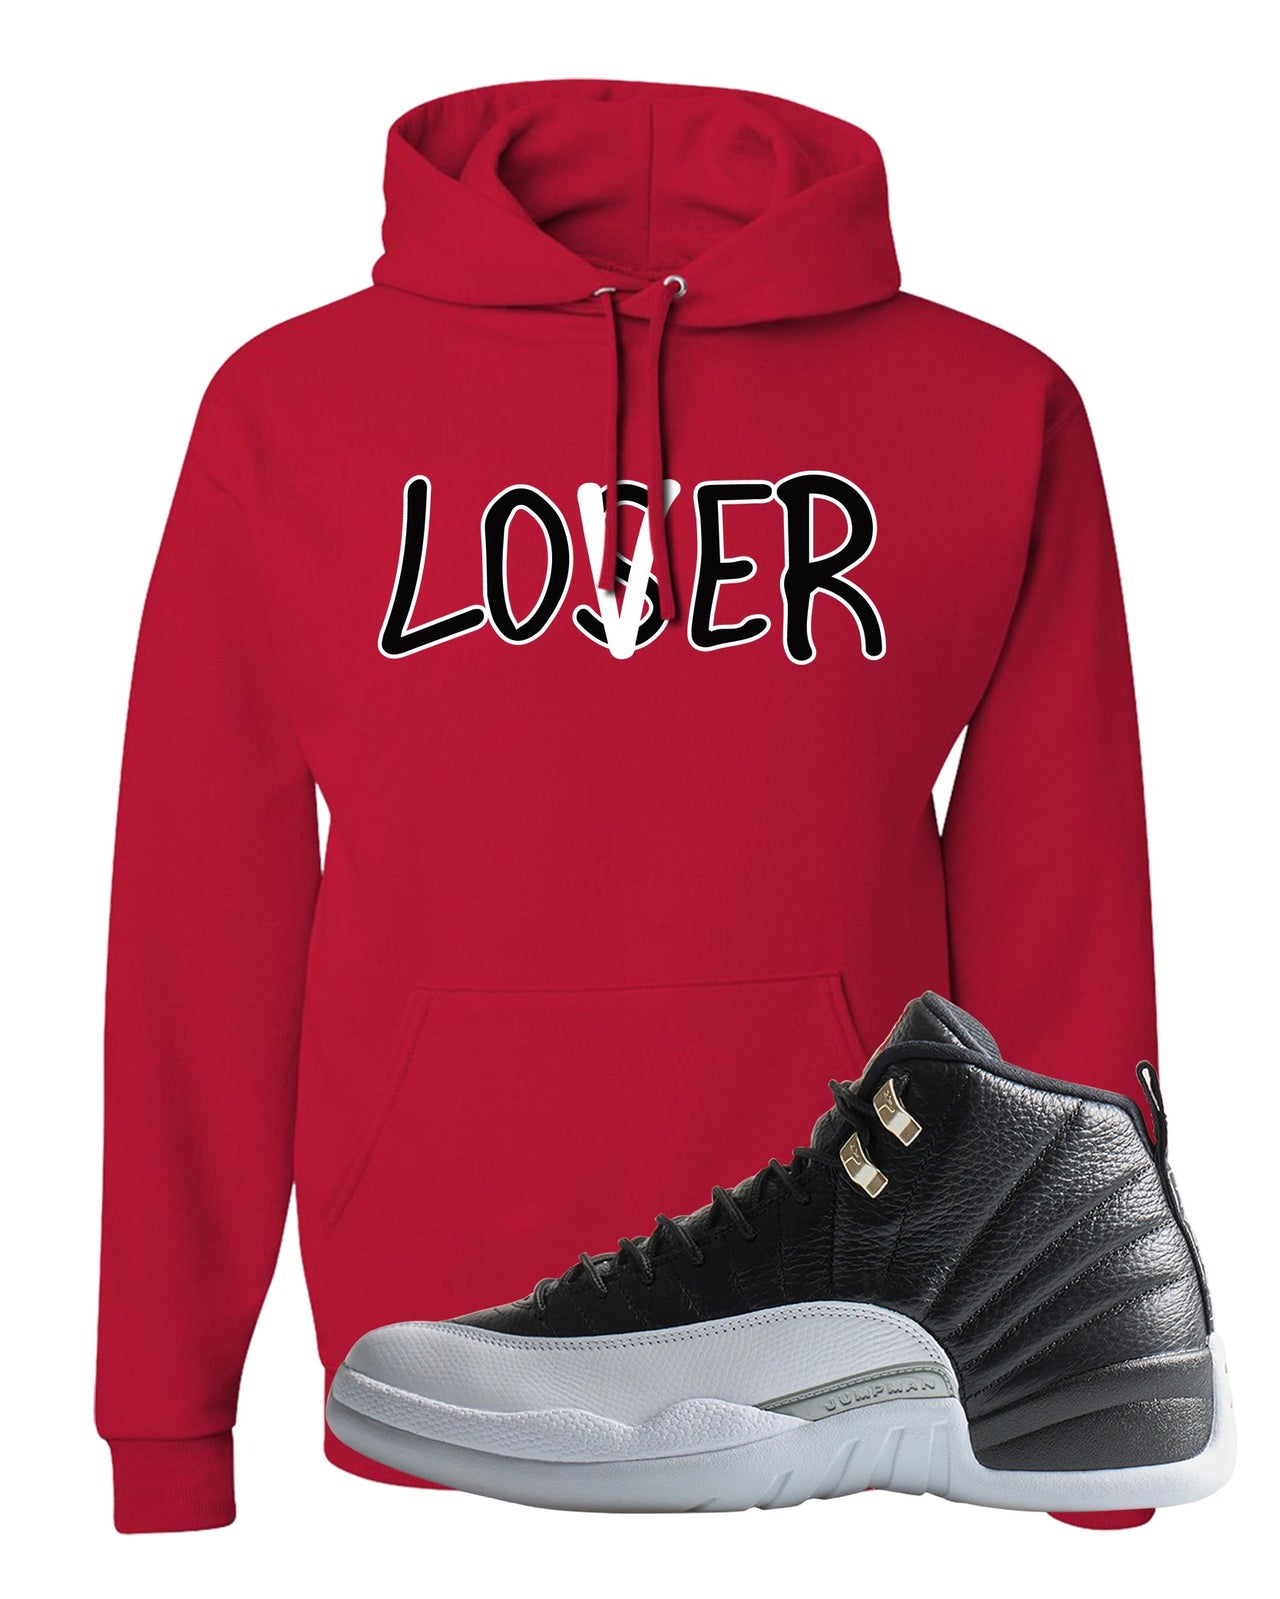 Playoff 12s Hoodie | Lover, Red